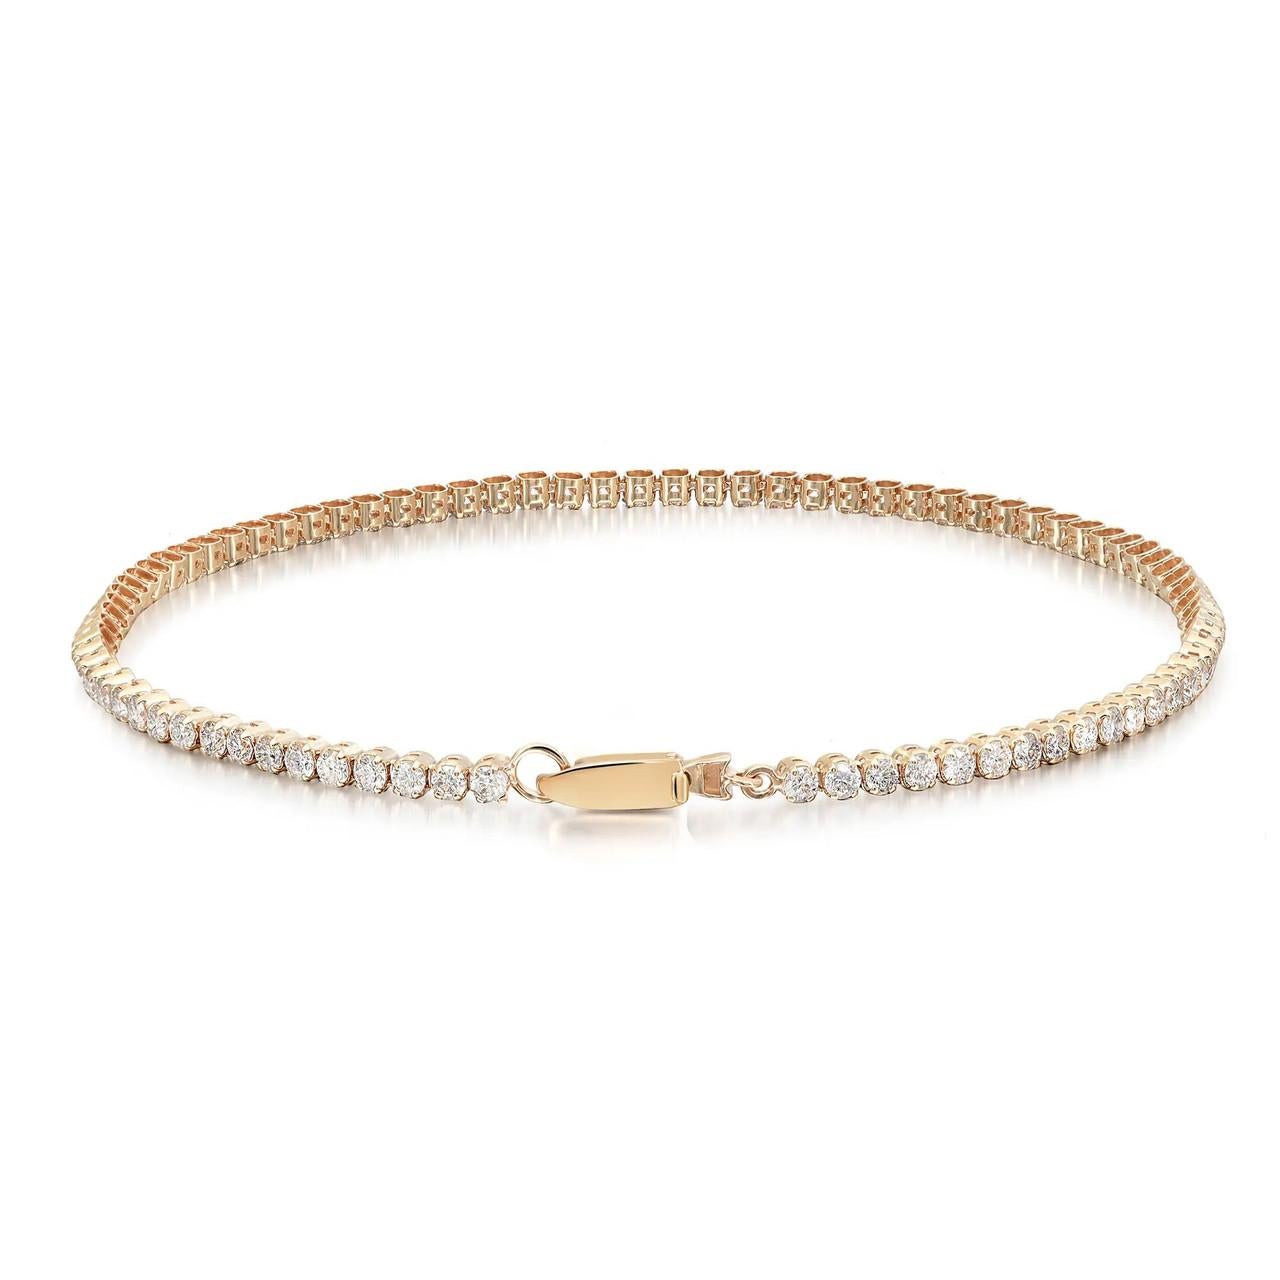 Elevate your wrist with the brilliant charm of this prong-set round brilliant cut diamond tennis bracelet, skillfully crafted in 14K yellow gold. The captivating sparkle effortlessly infuses a touch of glamour into any ensemble. Designed for easy